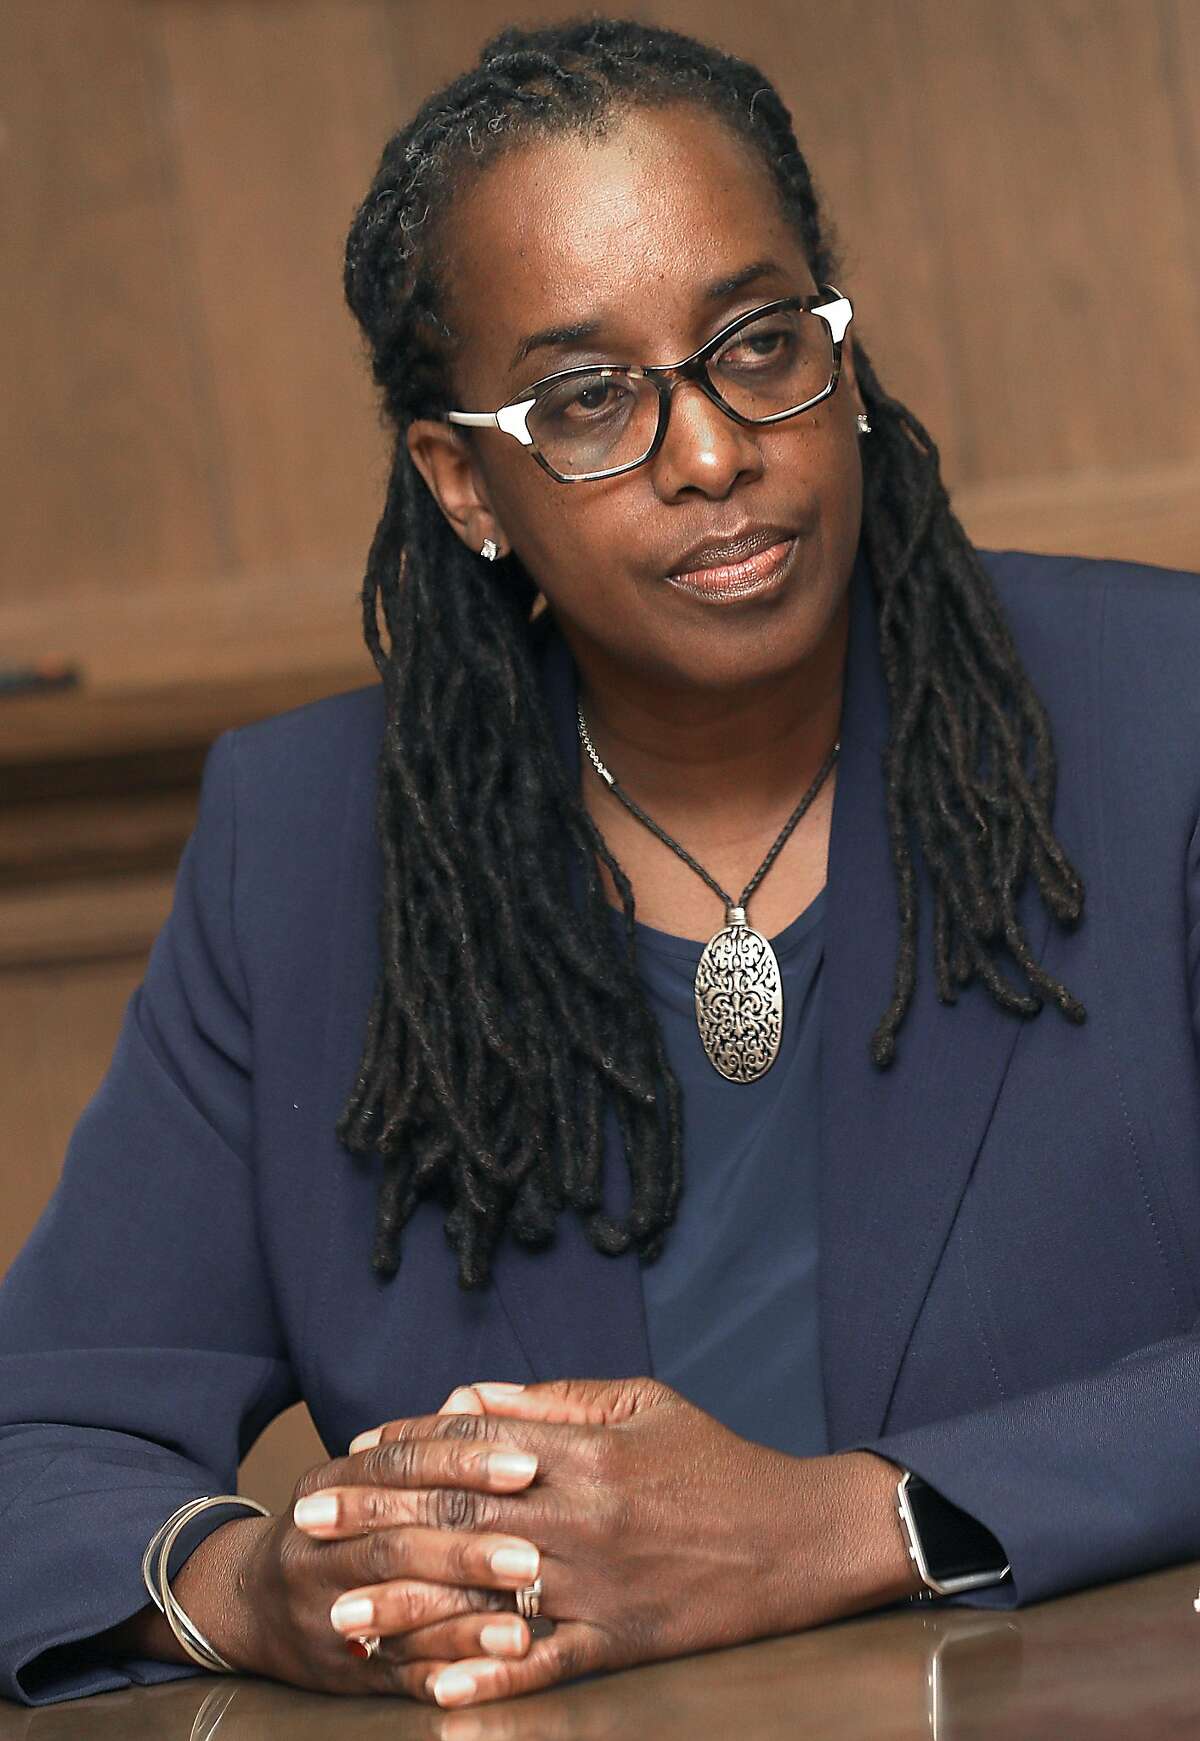 Jovanka Beckles, 55, is a youth mental health counselor and Richmond City Council member.